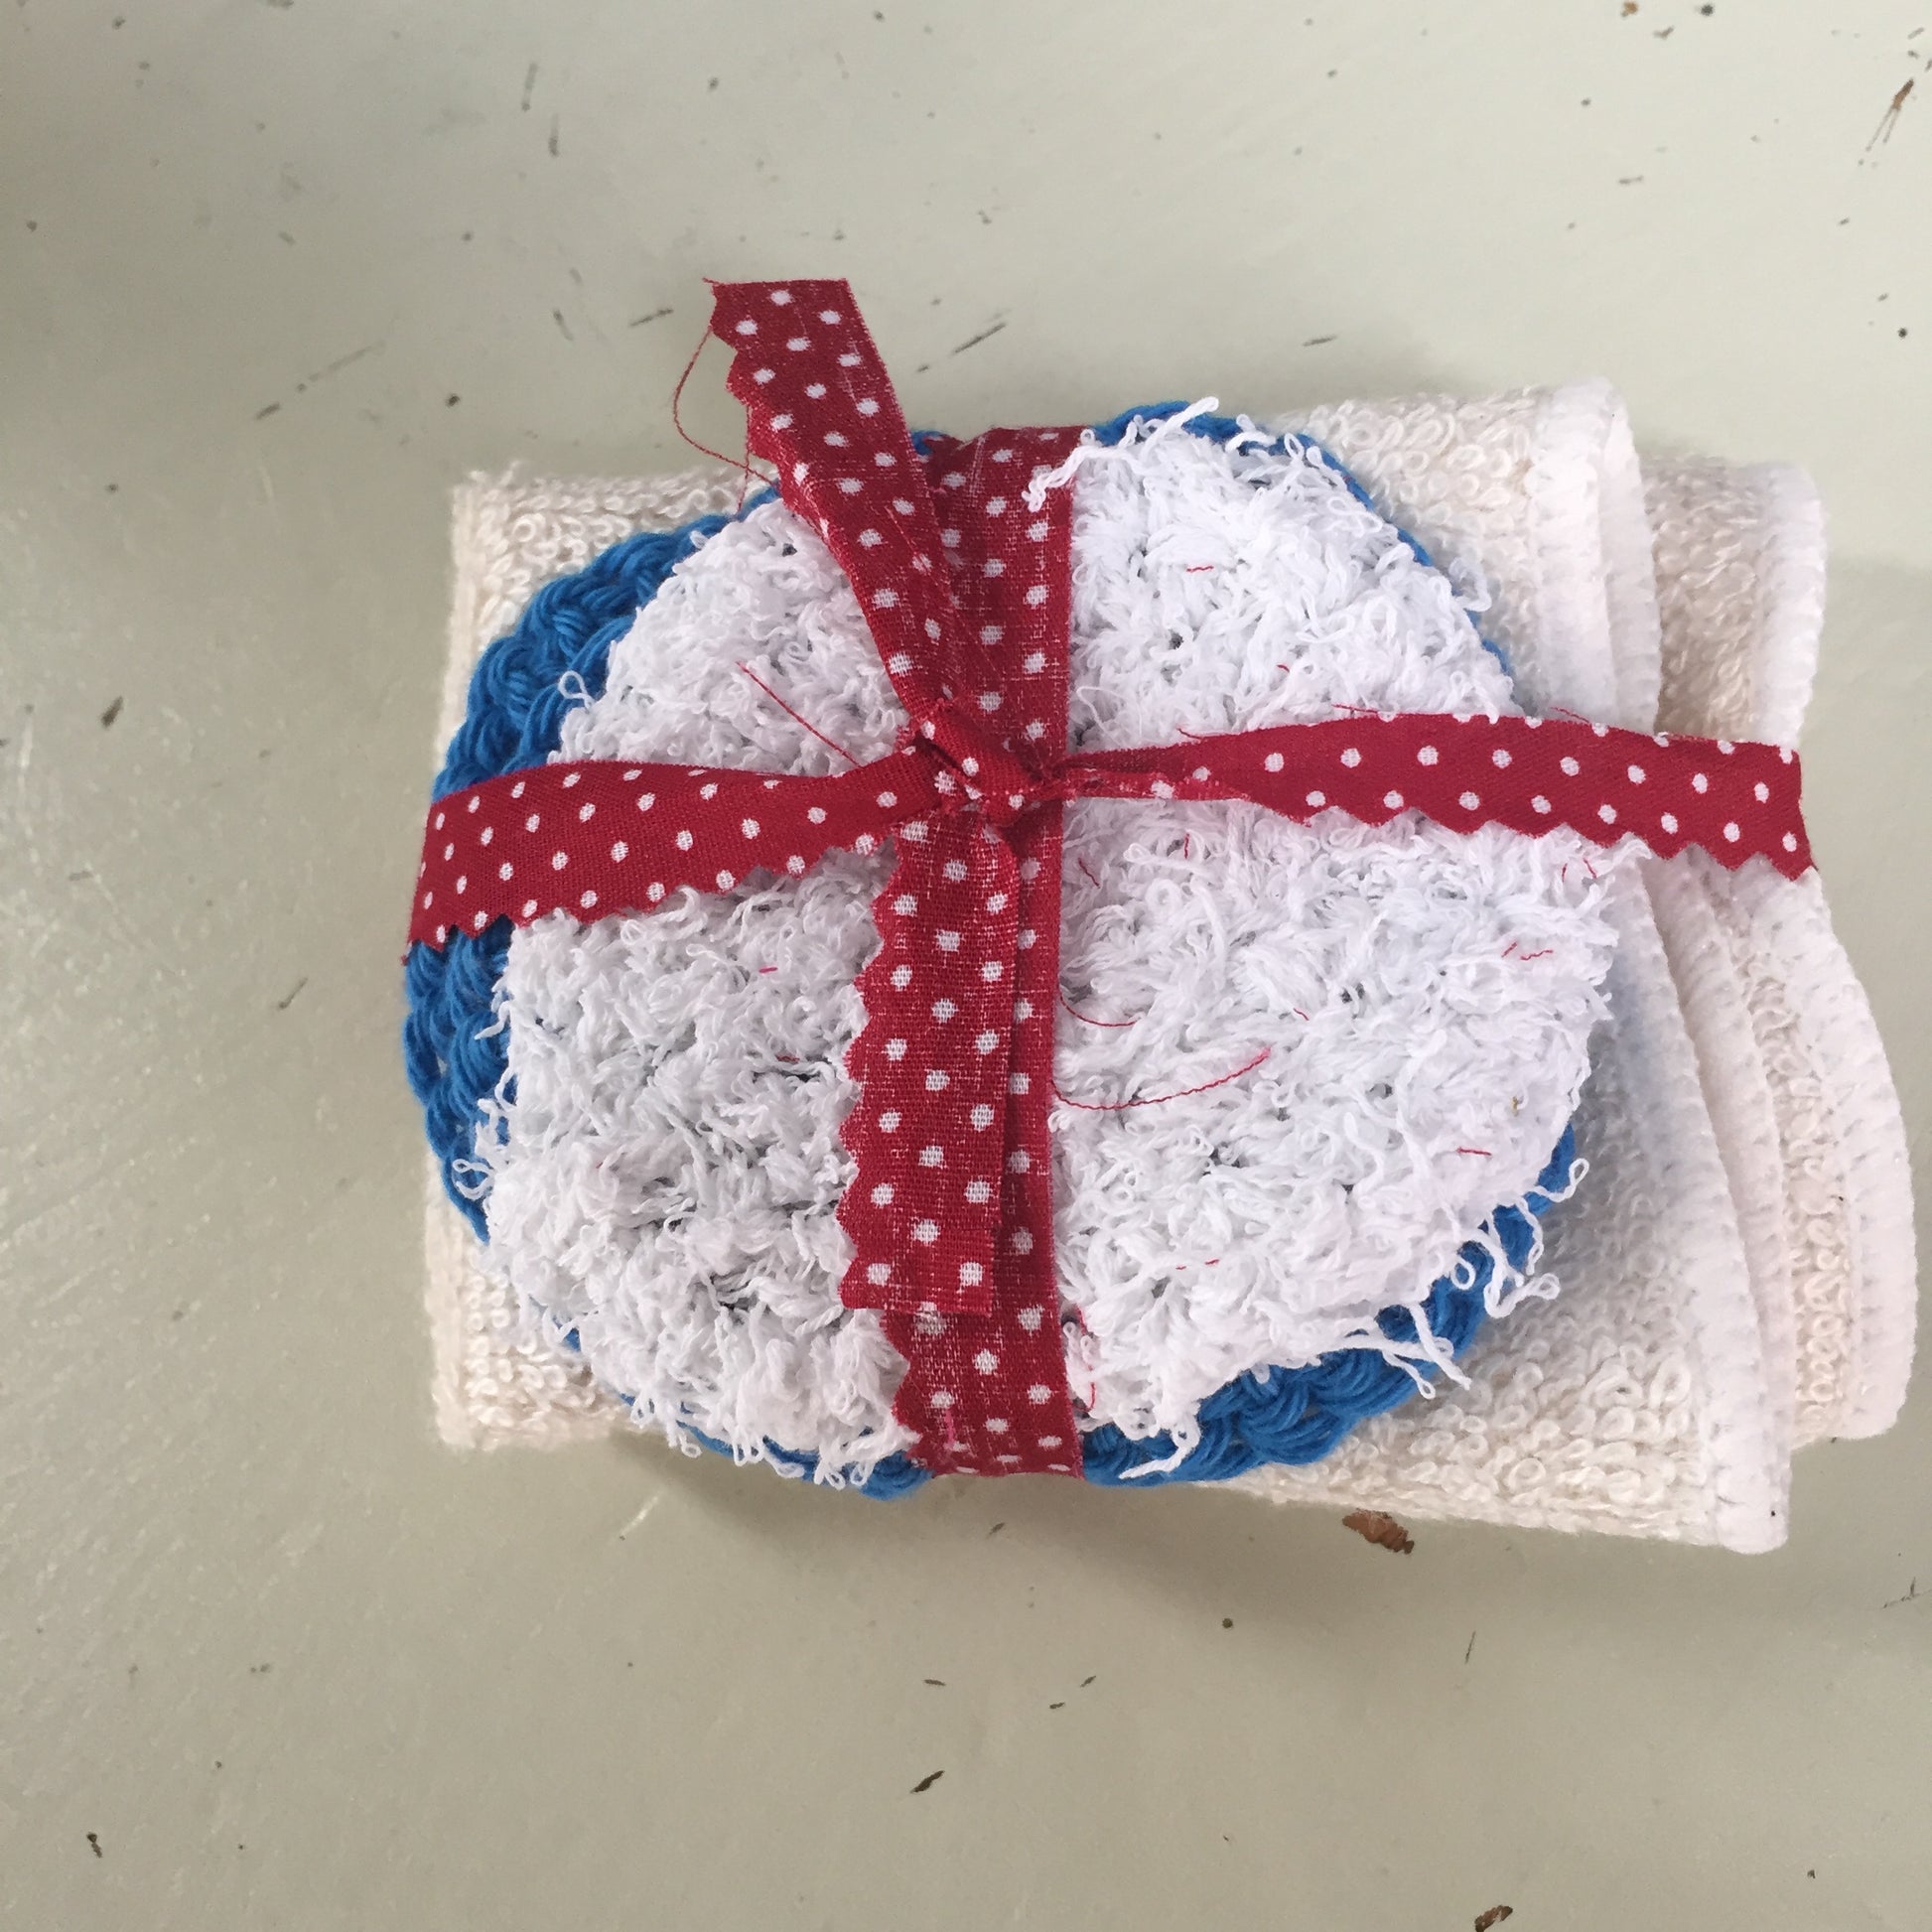 Scrubby bundle with exfoliator, two cotton scrbbies and a muslin cloth